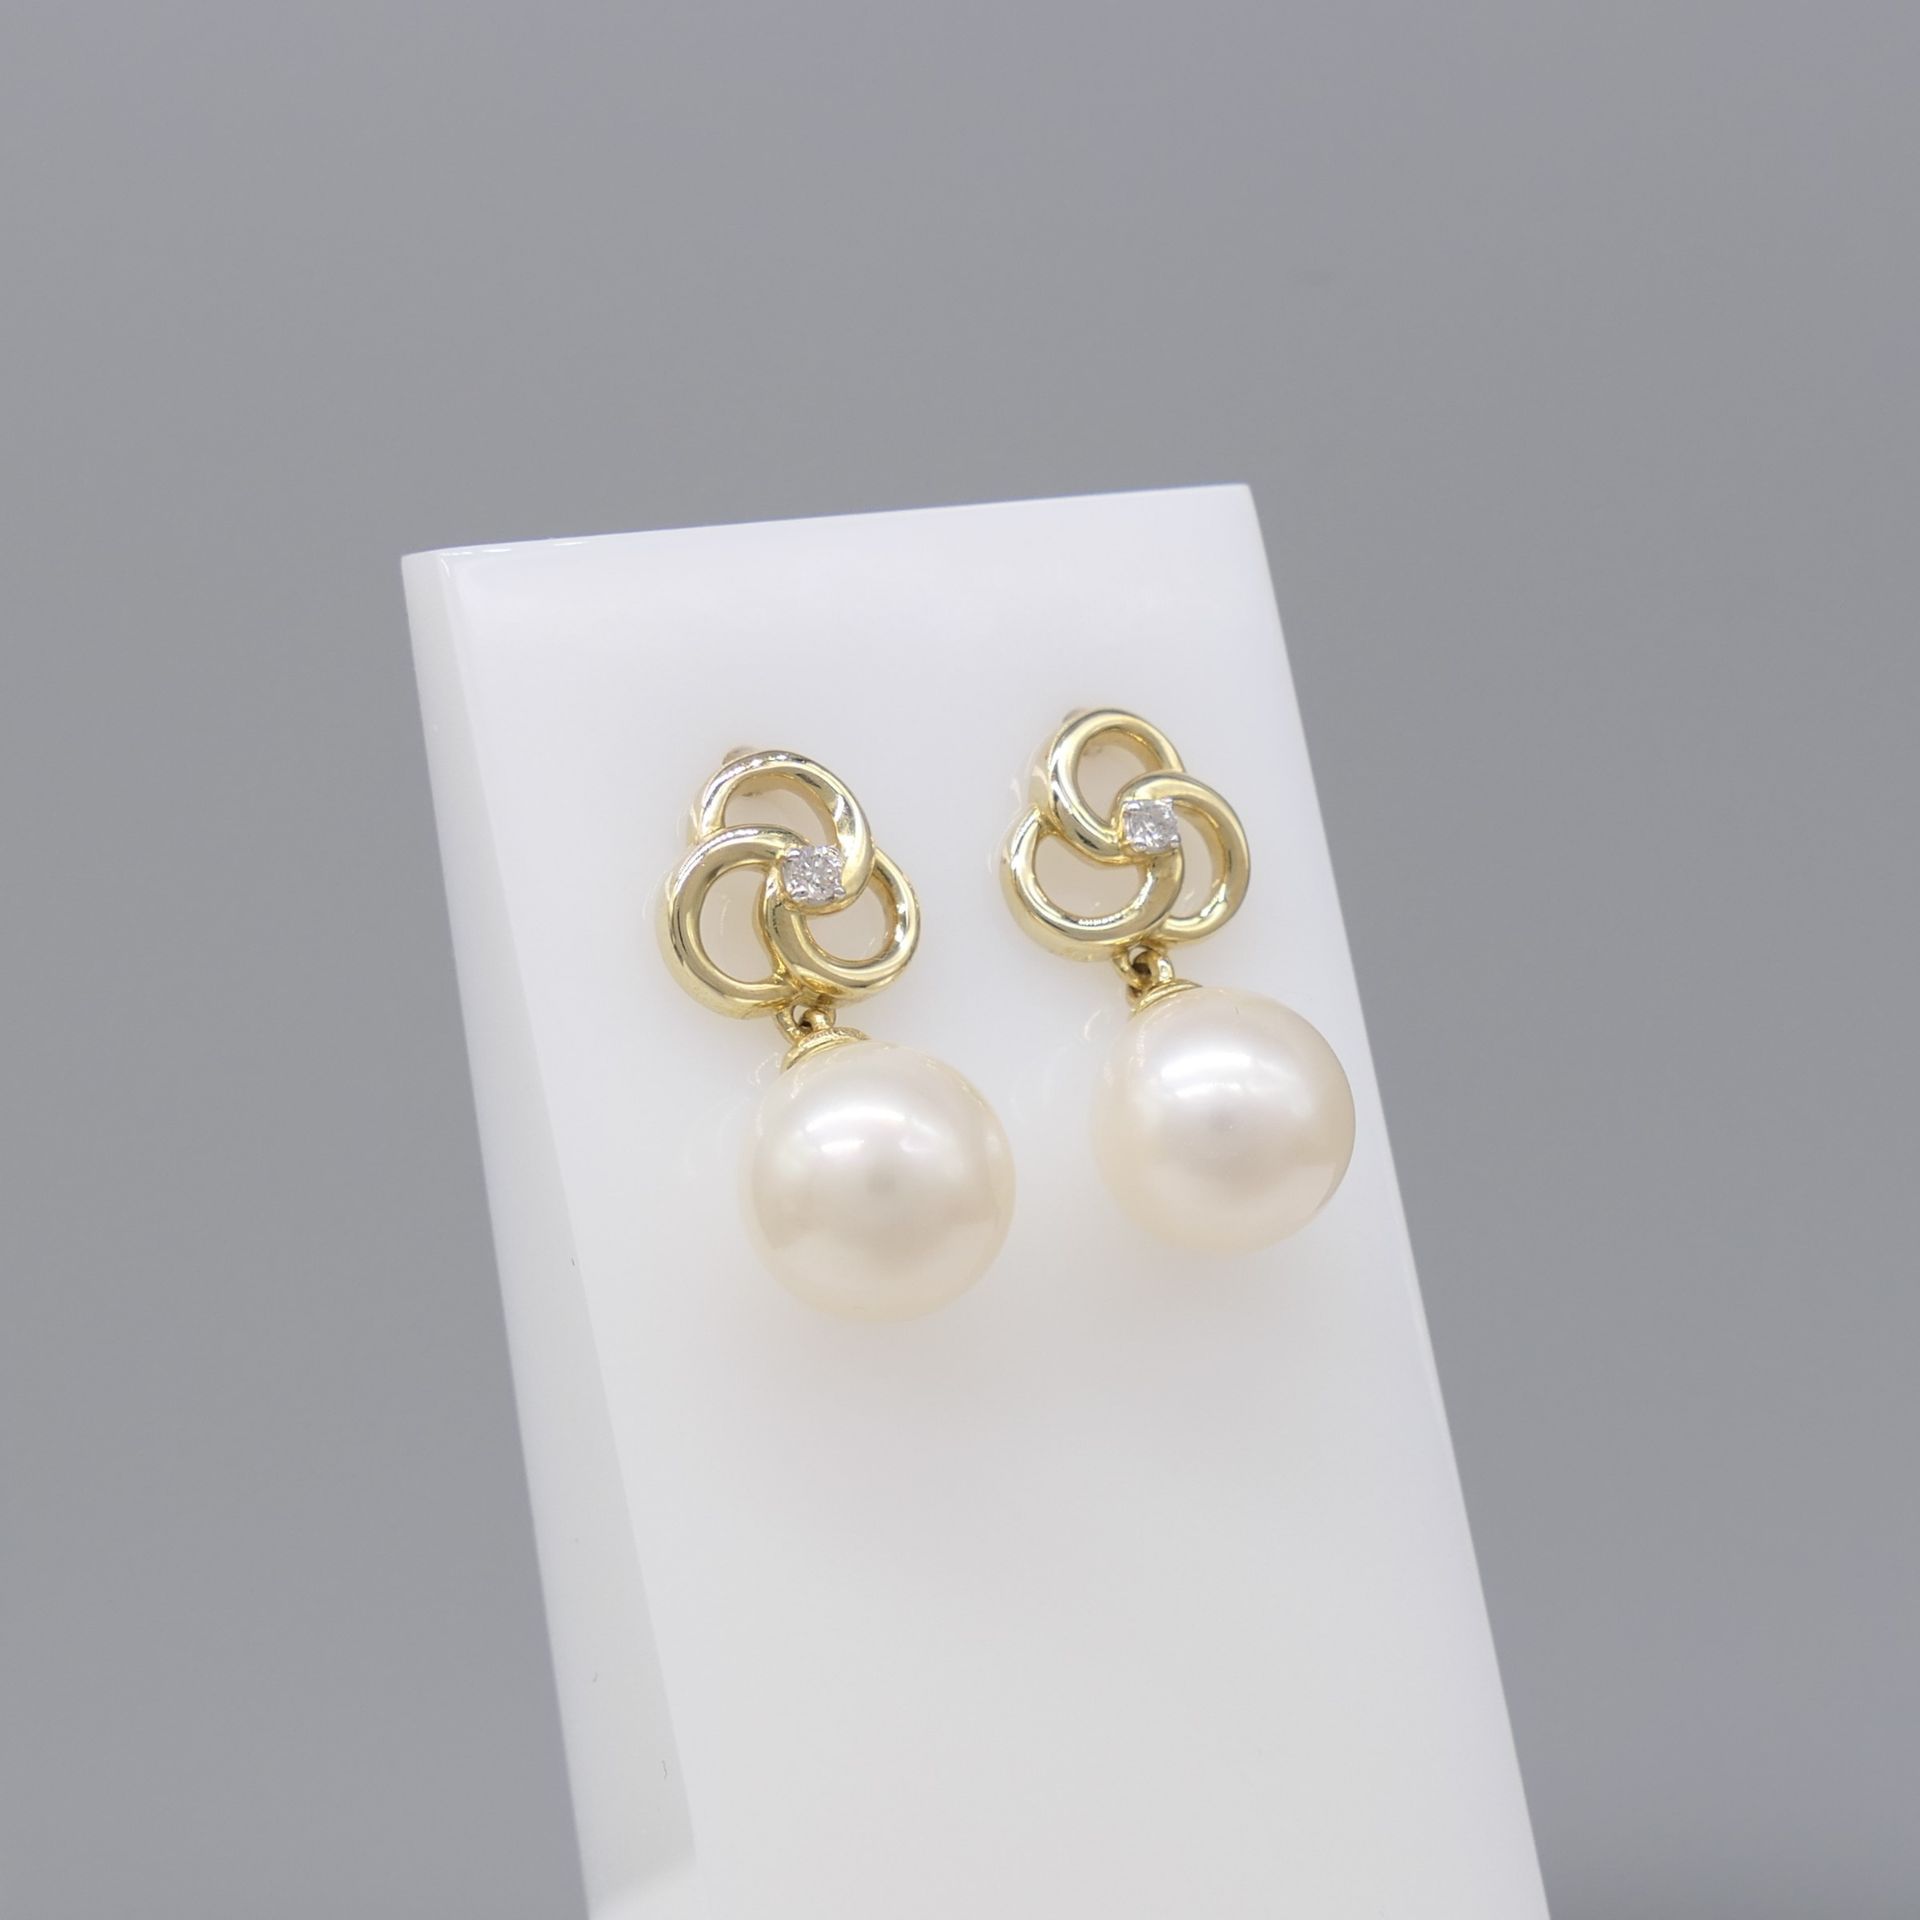 Freshwater Pearl and Diamond Pinwheel Droplet Earrings In 9ct Yellow Gold, Boxed - Image 2 of 5